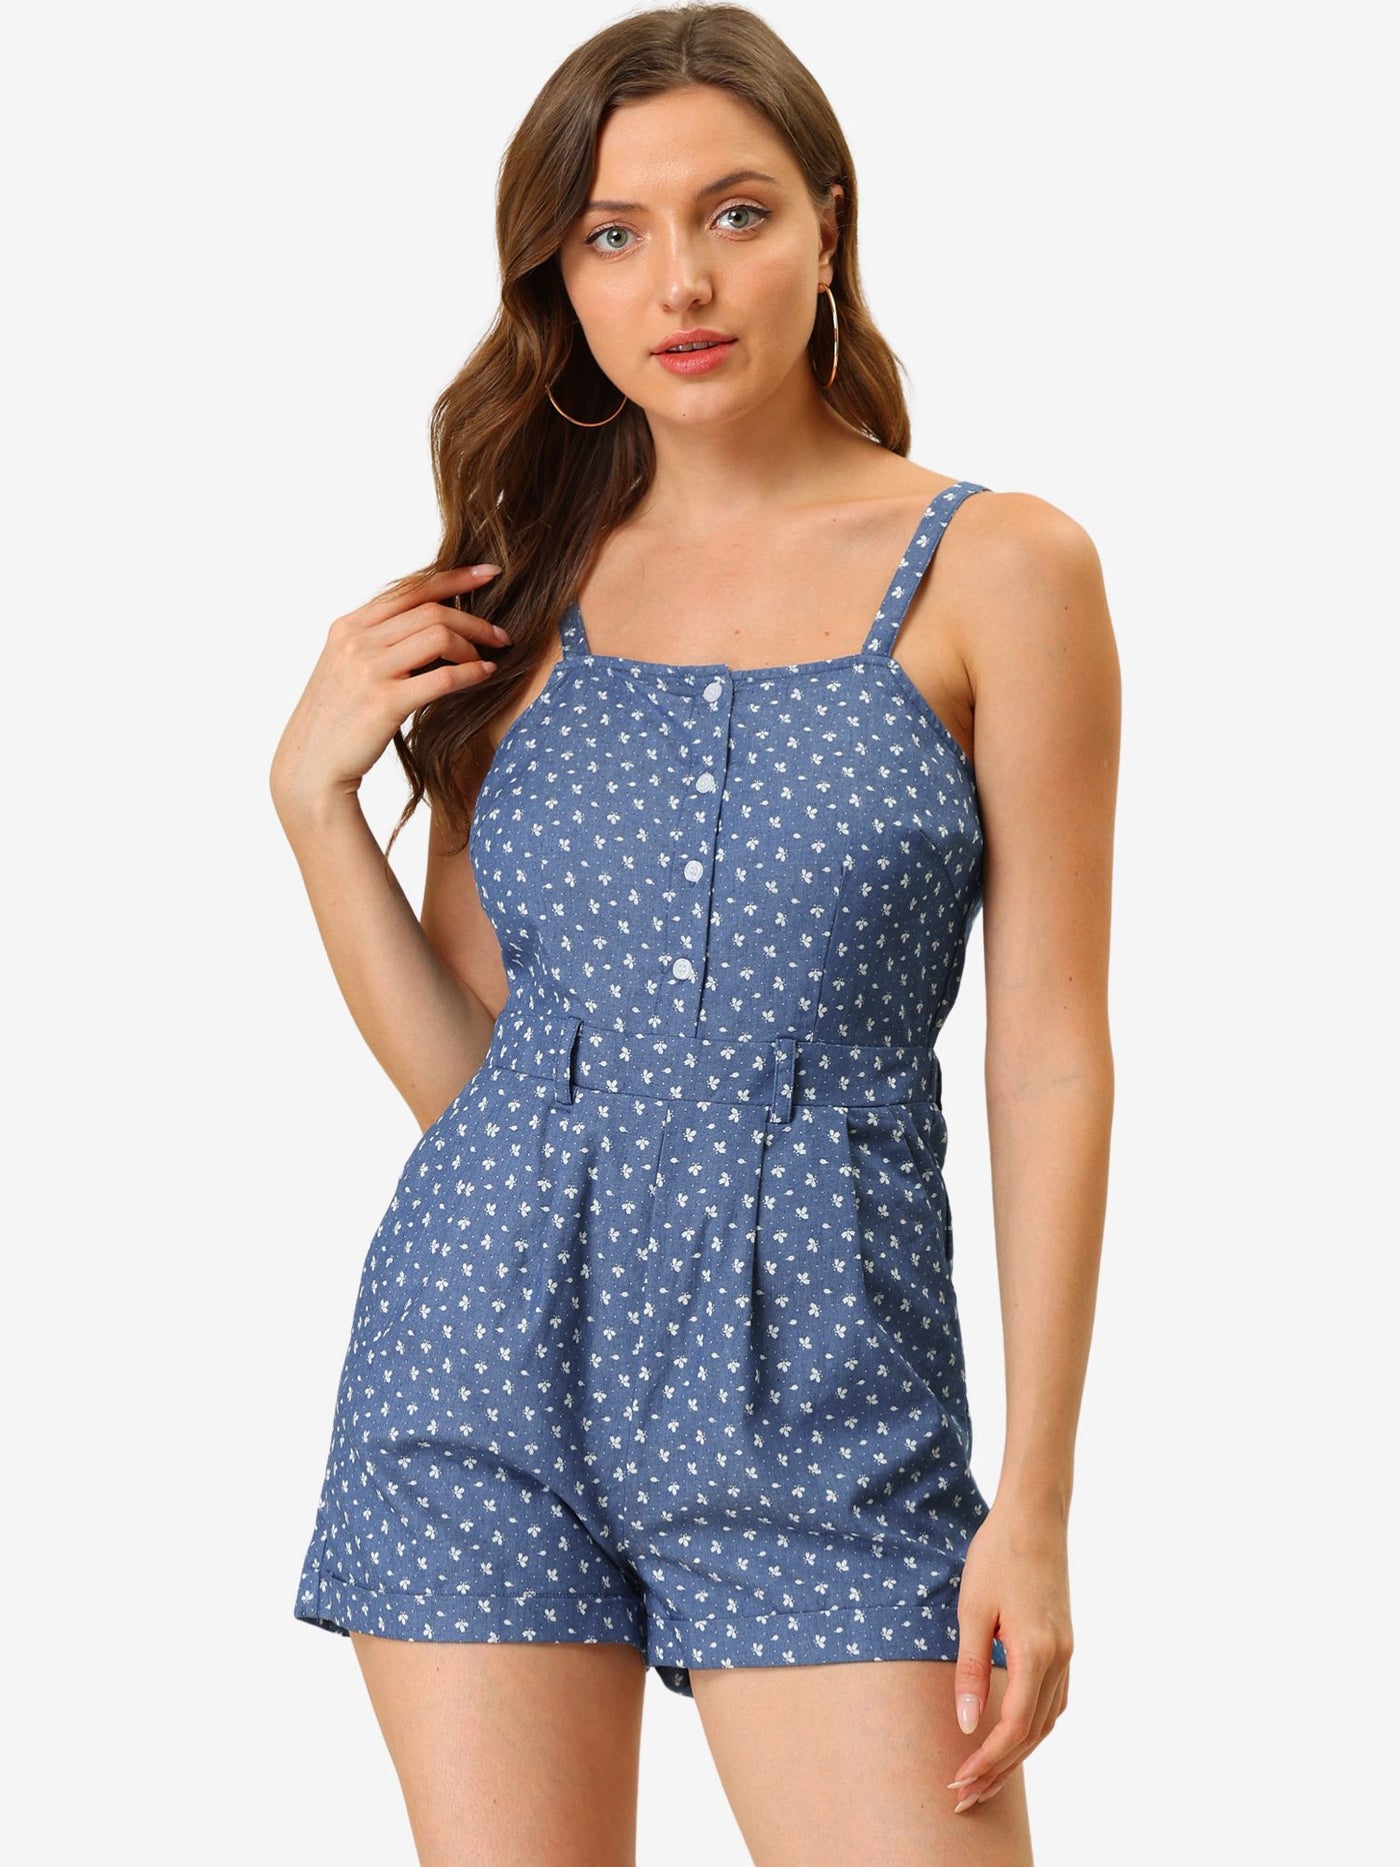 Allegra K Short Overalls Chambray Sleeveless Jumpsuit Casual Print Rompers